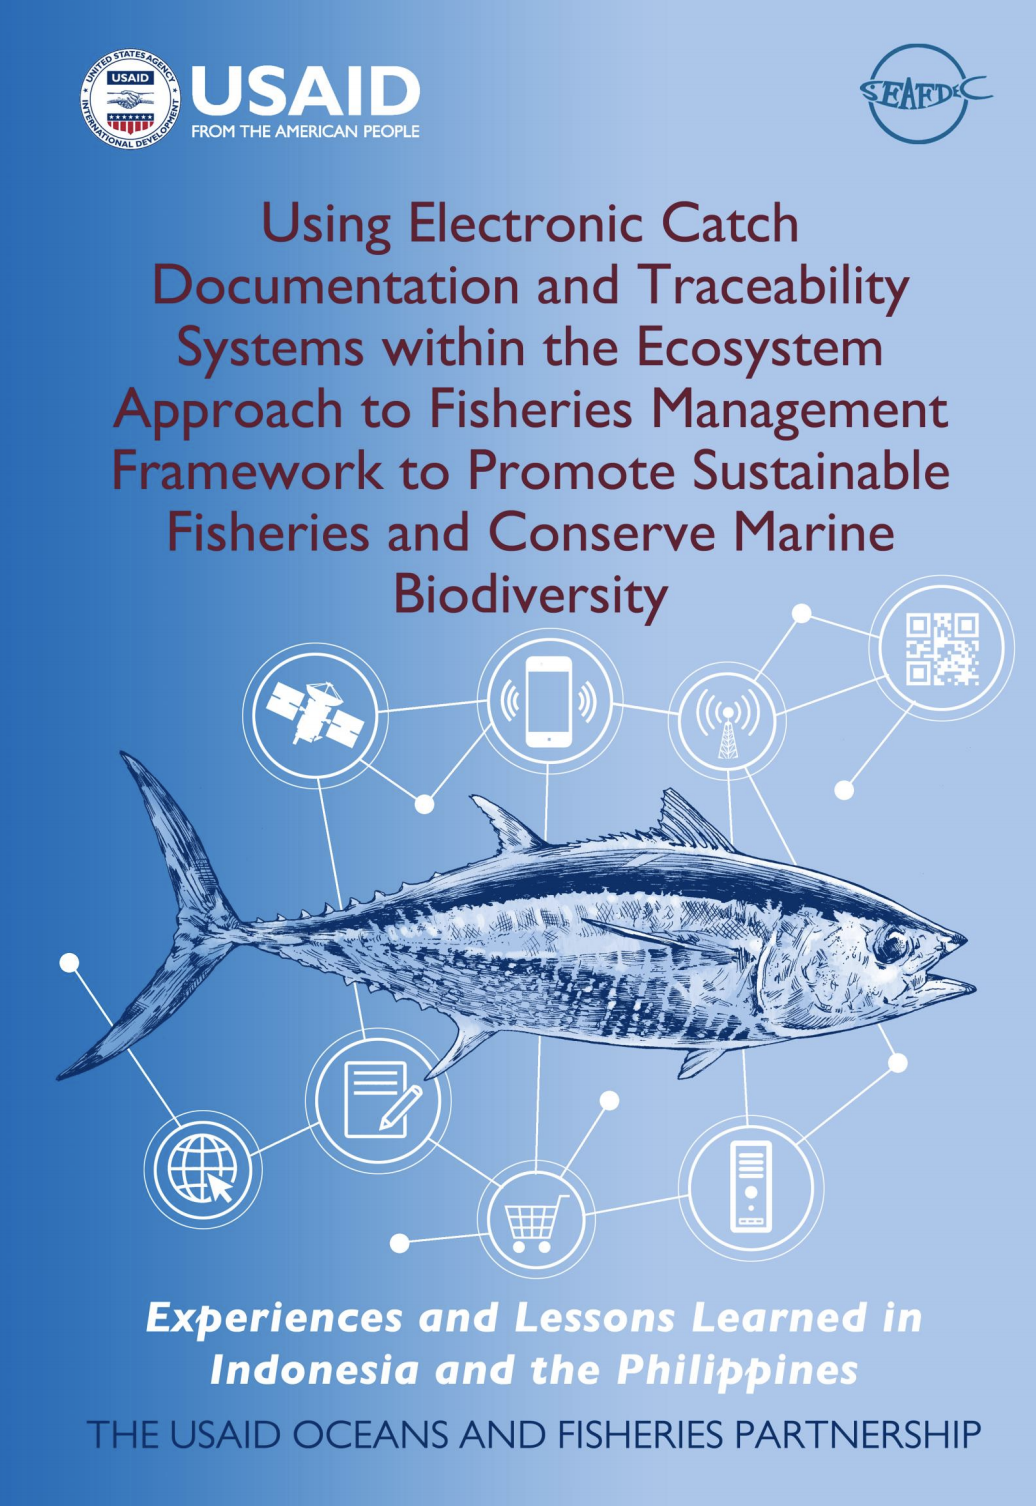 Using eCDT Systems within the EAFM Framework to Promote Sustainable Fisheries and Conserve Marine Biodiversity